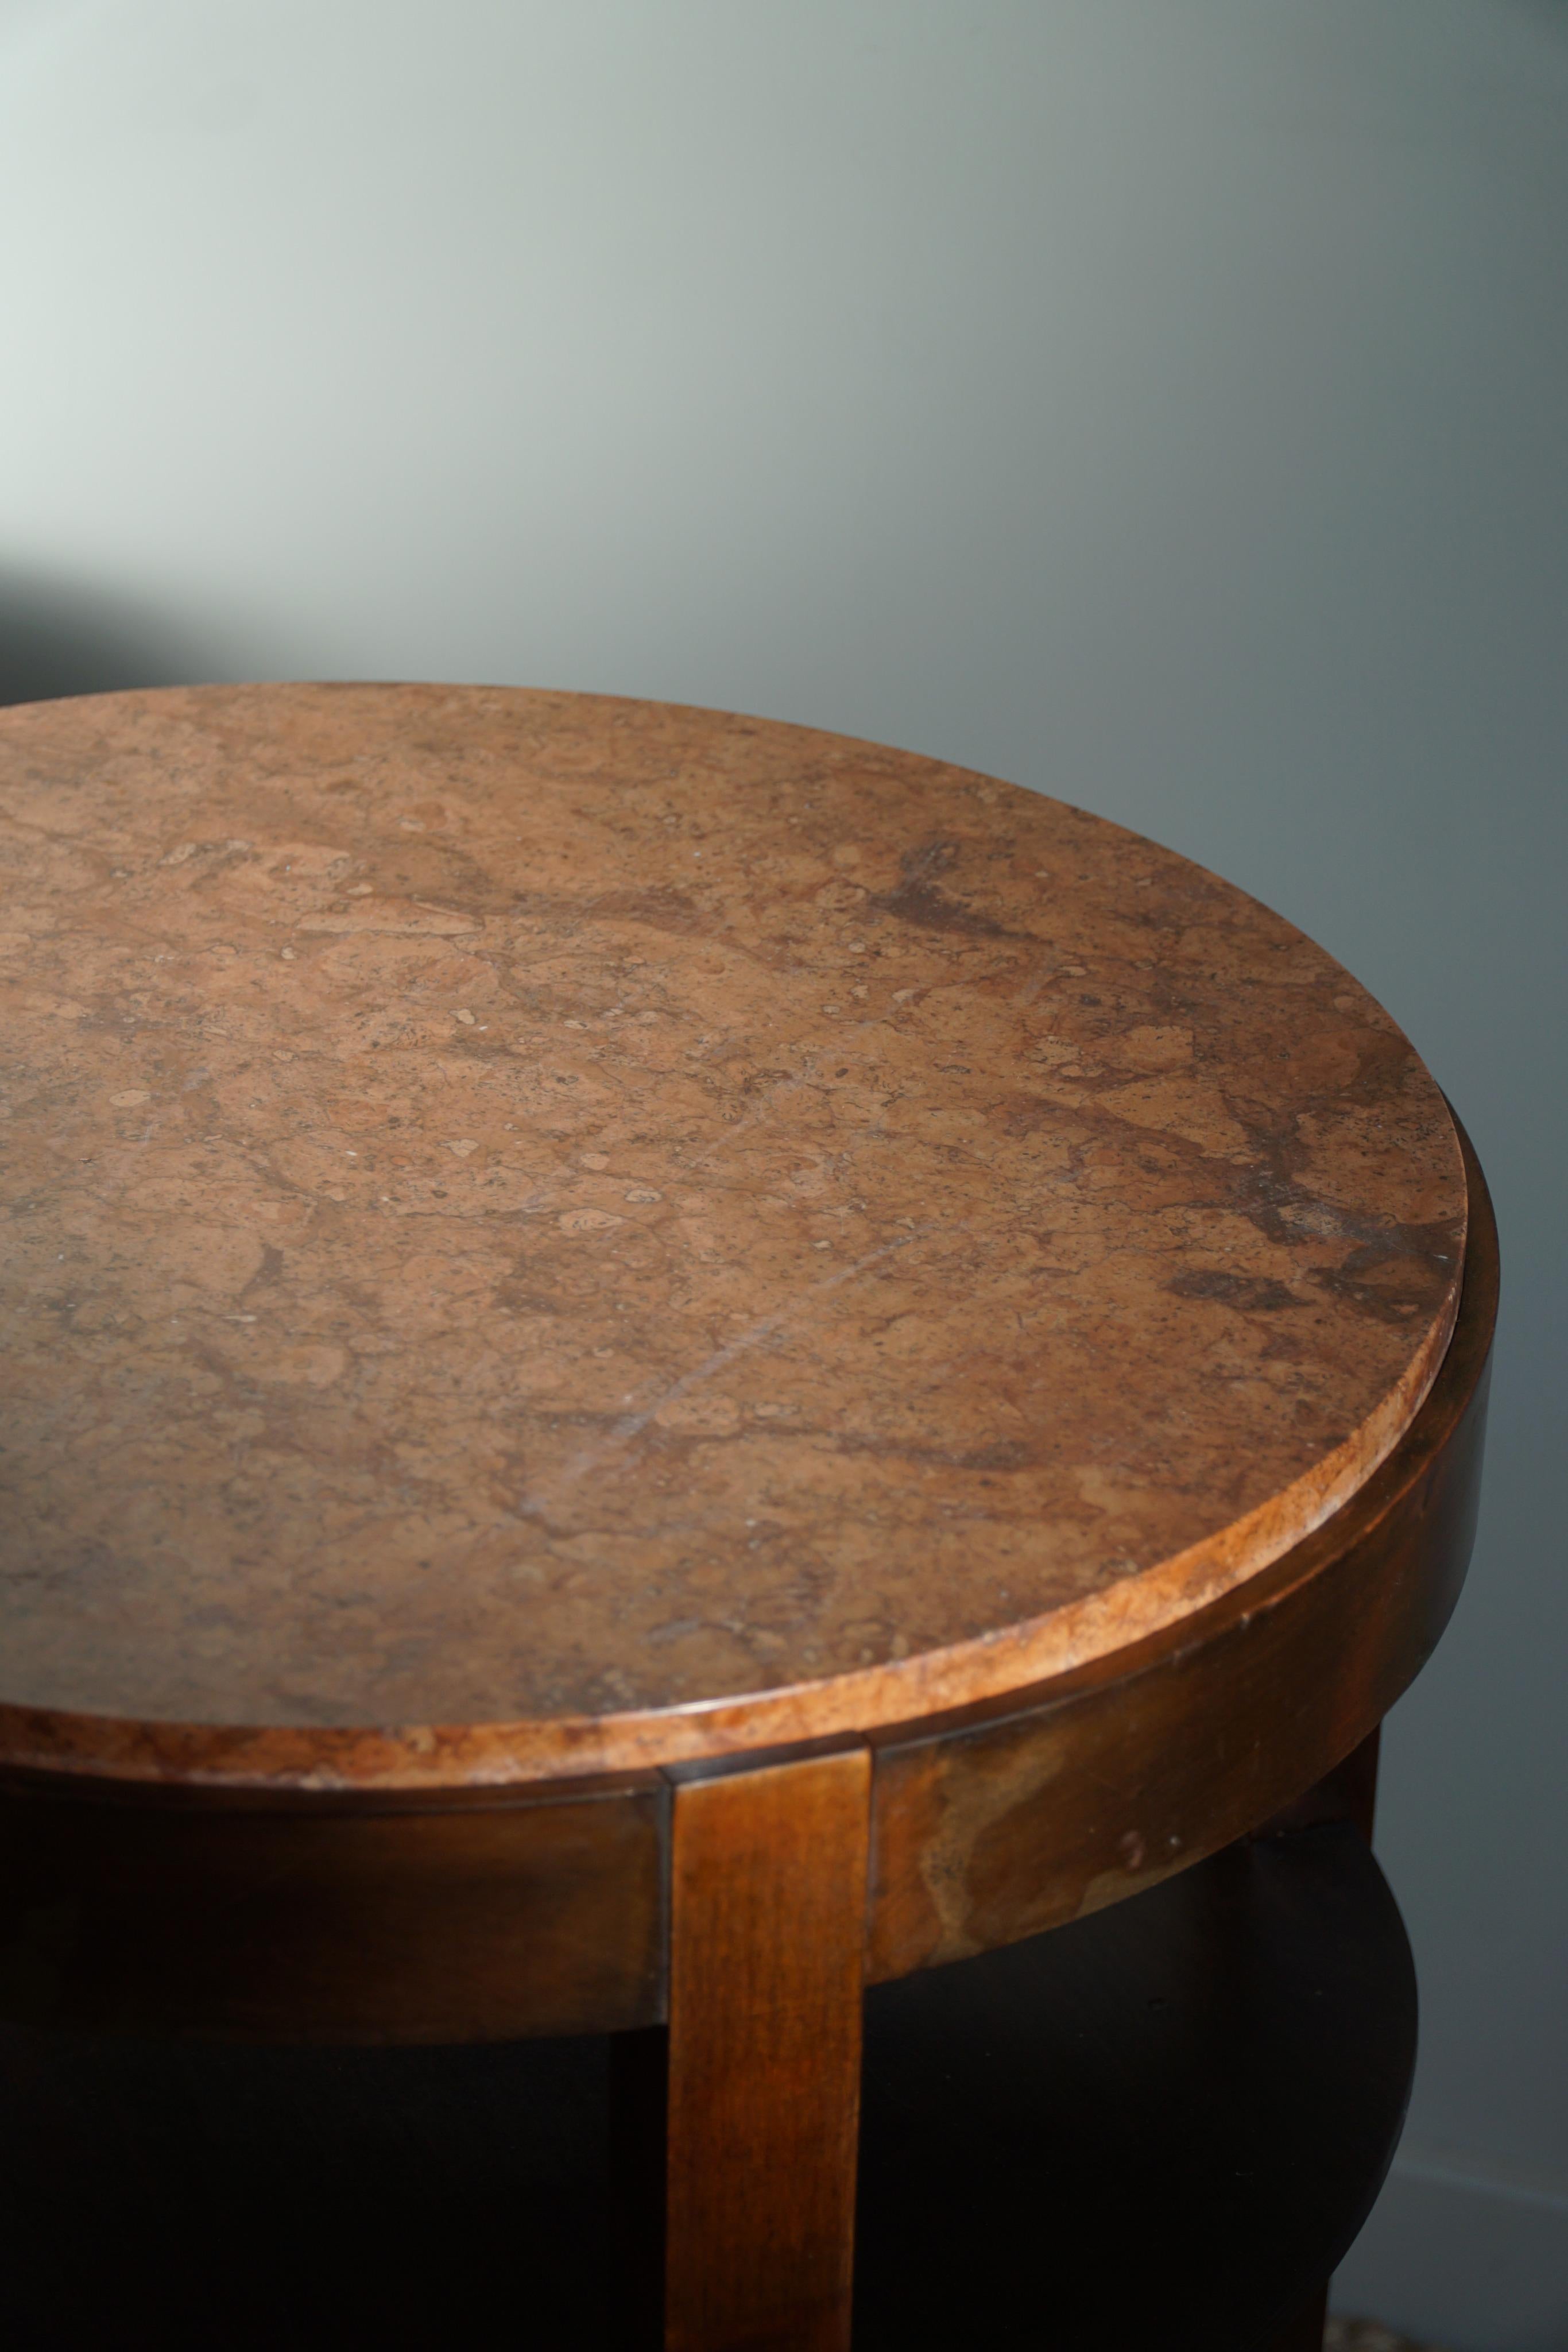 Round Art Deco Side Table in Beech & Marble Top, By a Danish Cabinetmaker, 1940s For Sale 2